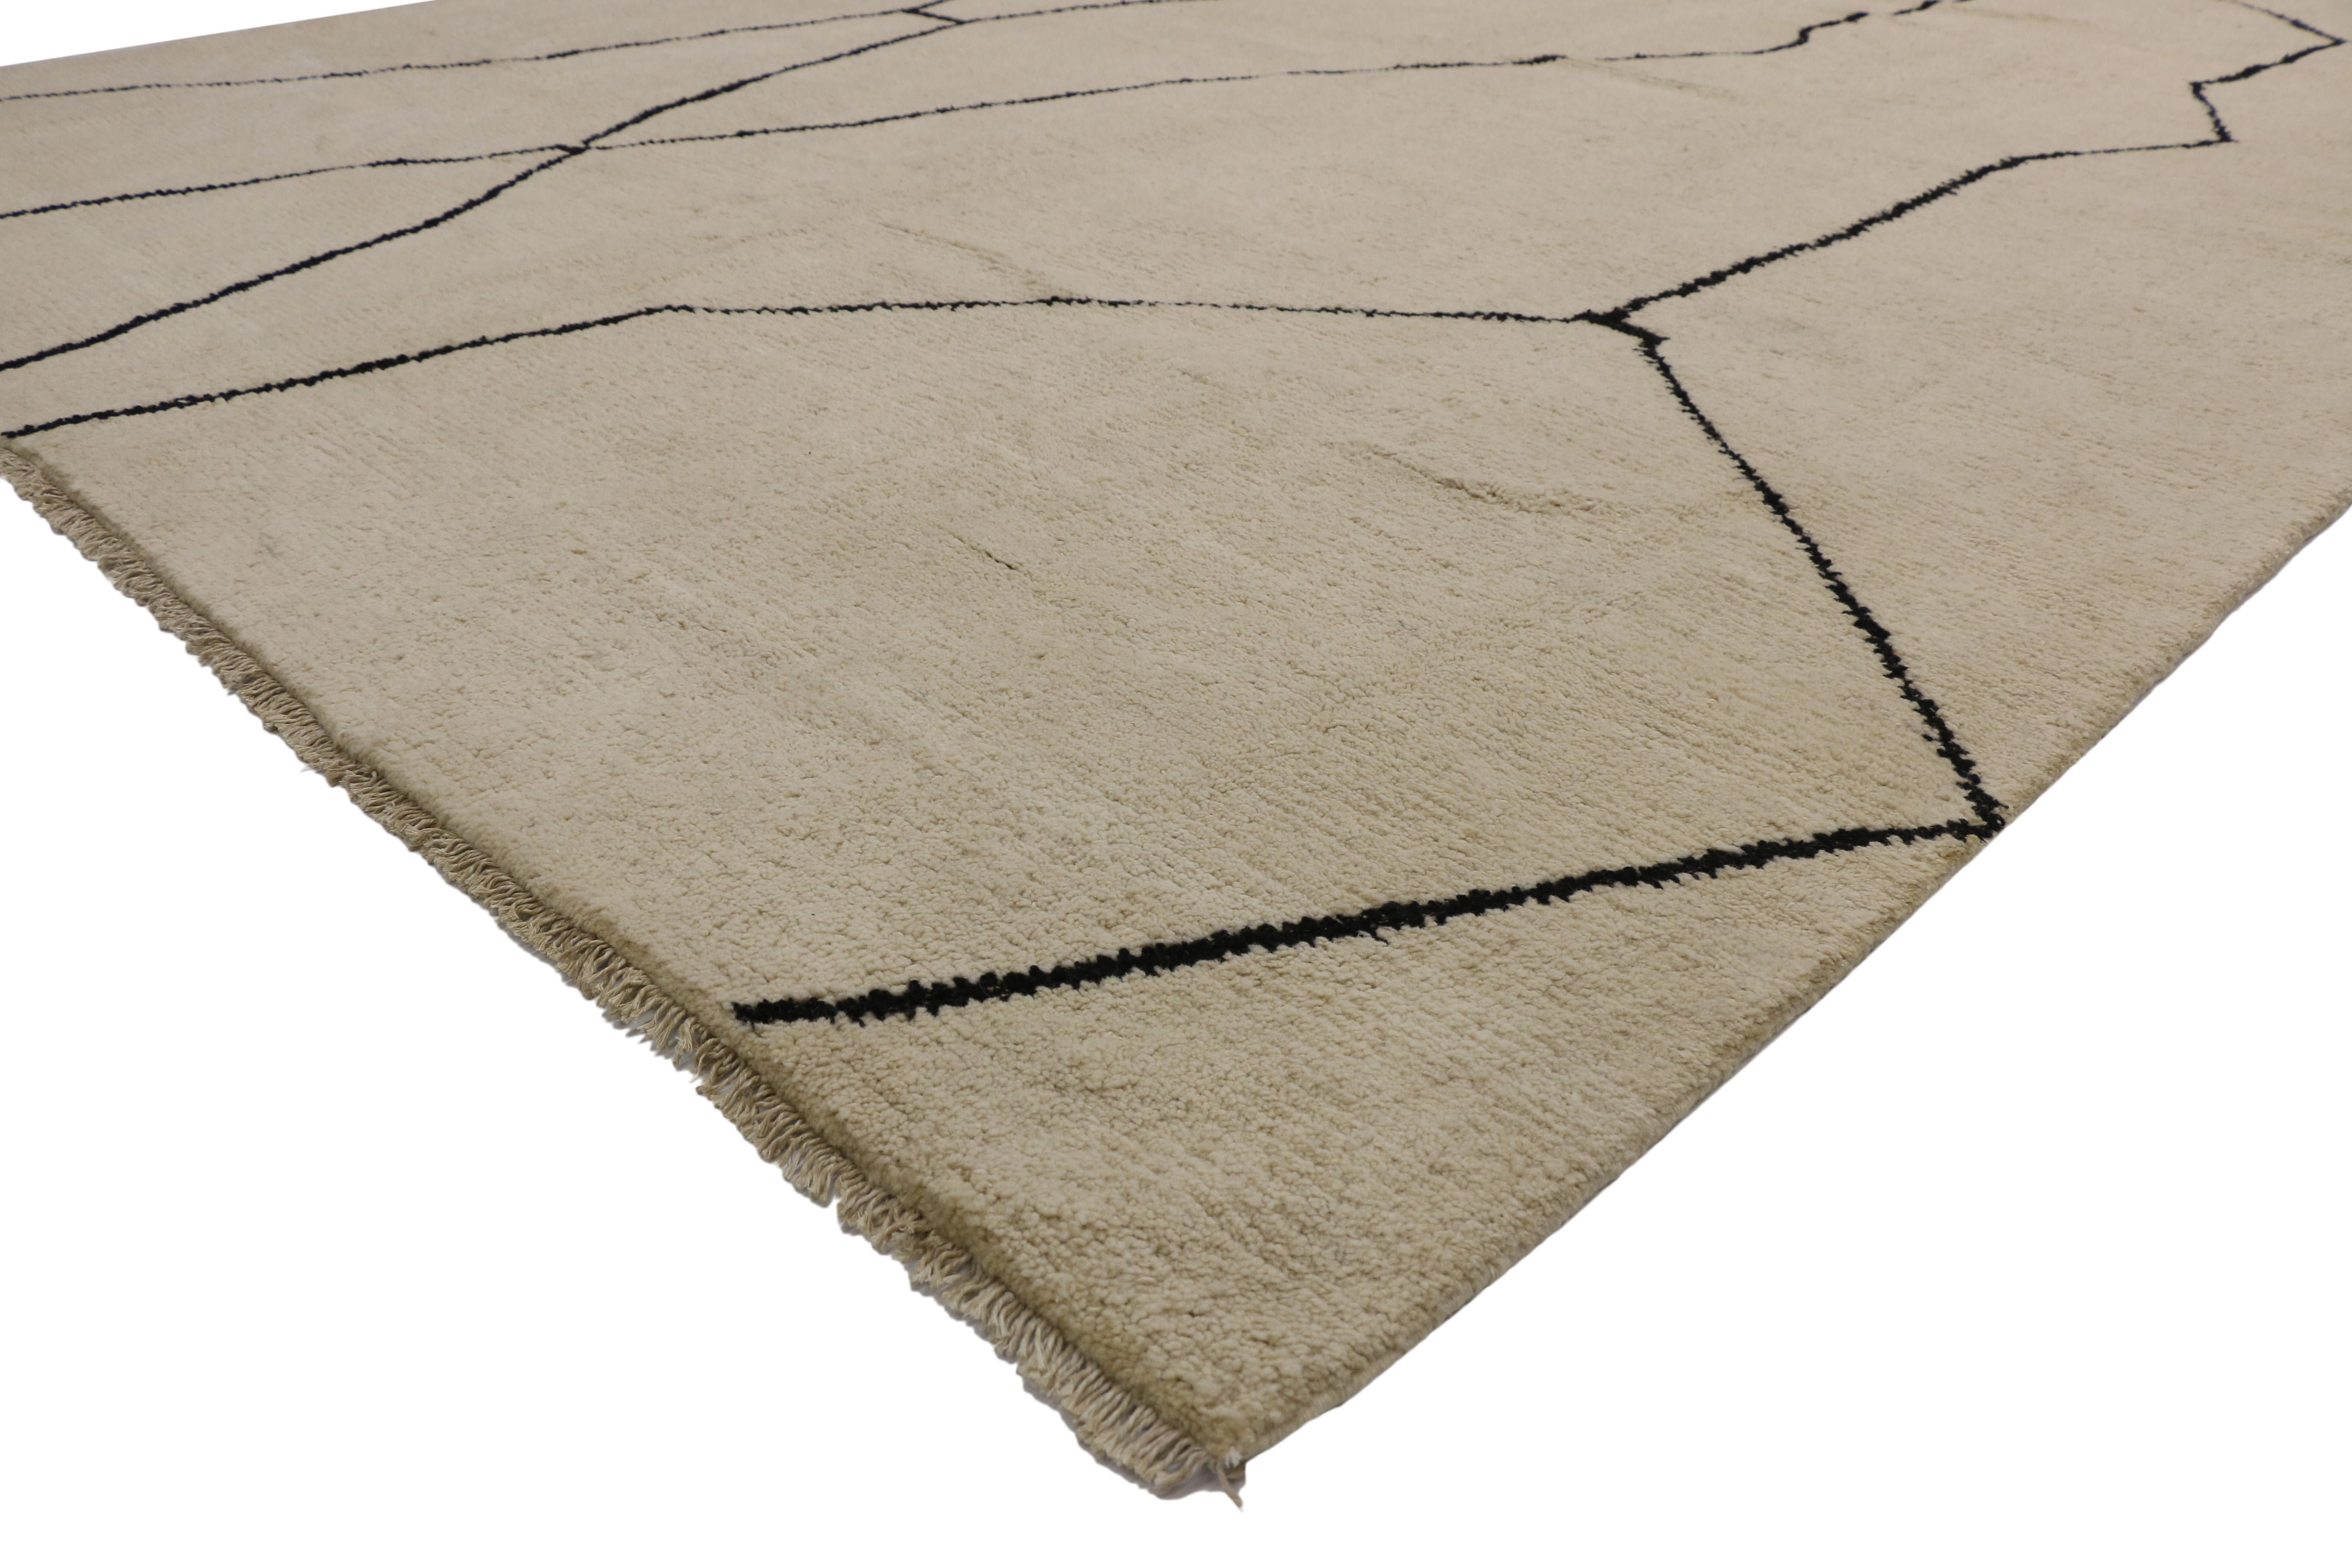 80514, new contemporary Moroccan area rug with metamorphic design and modern style. This hand knotted wool contemporary Moroccan area rug features contrasting black lines running the length of the sandy-beige backdrop. The Metamorphic marble veins